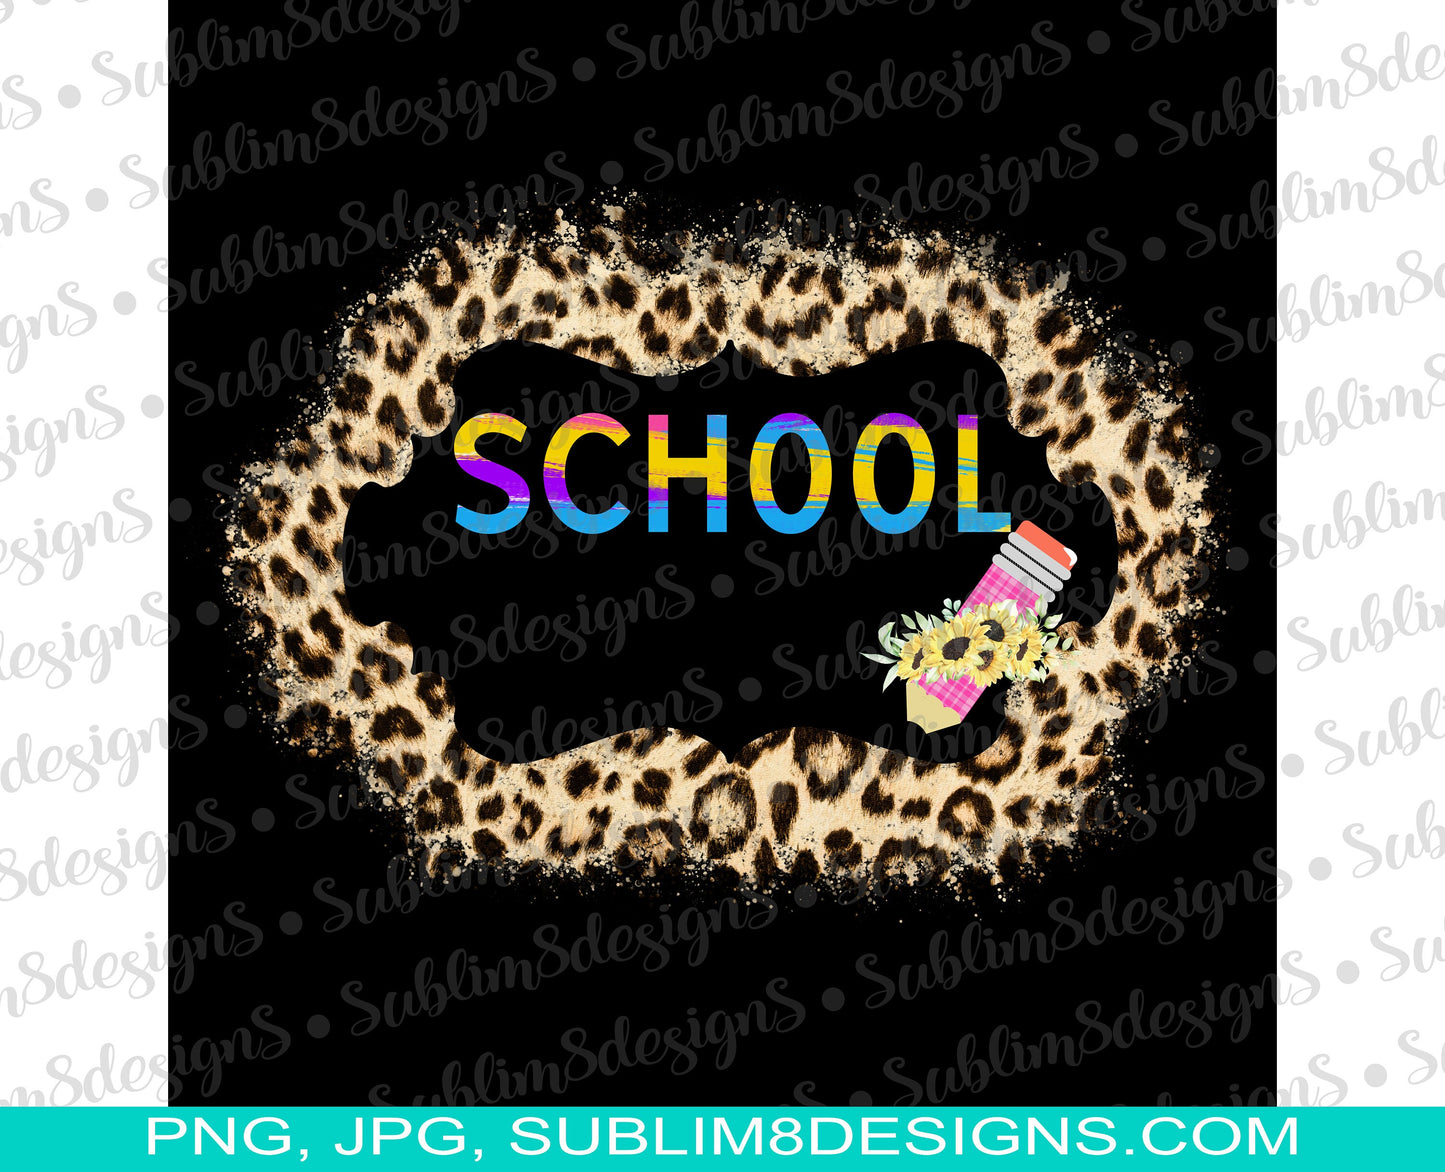 School Leopard Print PNG and JPG ONLY